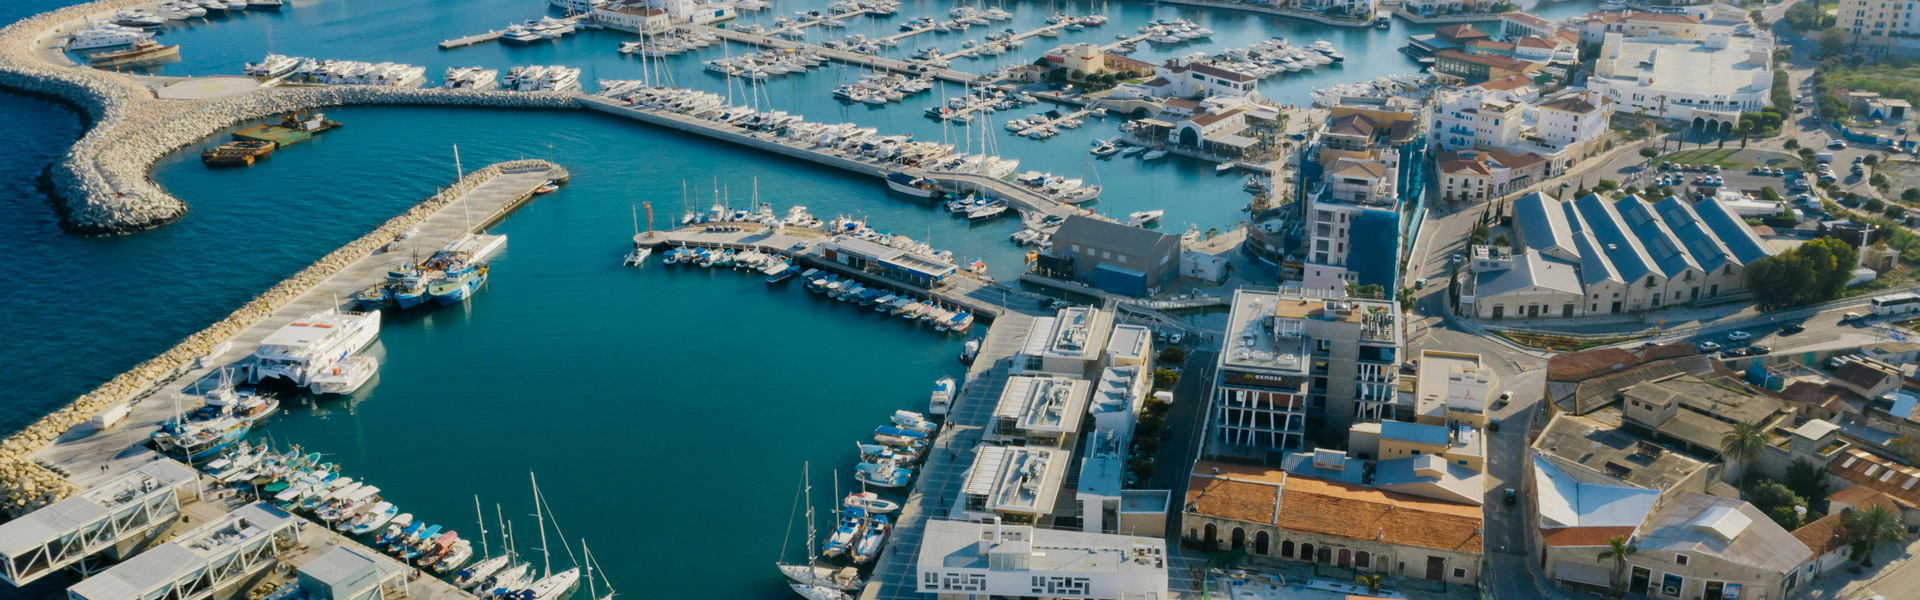 Aerial view of boats in Limassol marina in Cyprus.